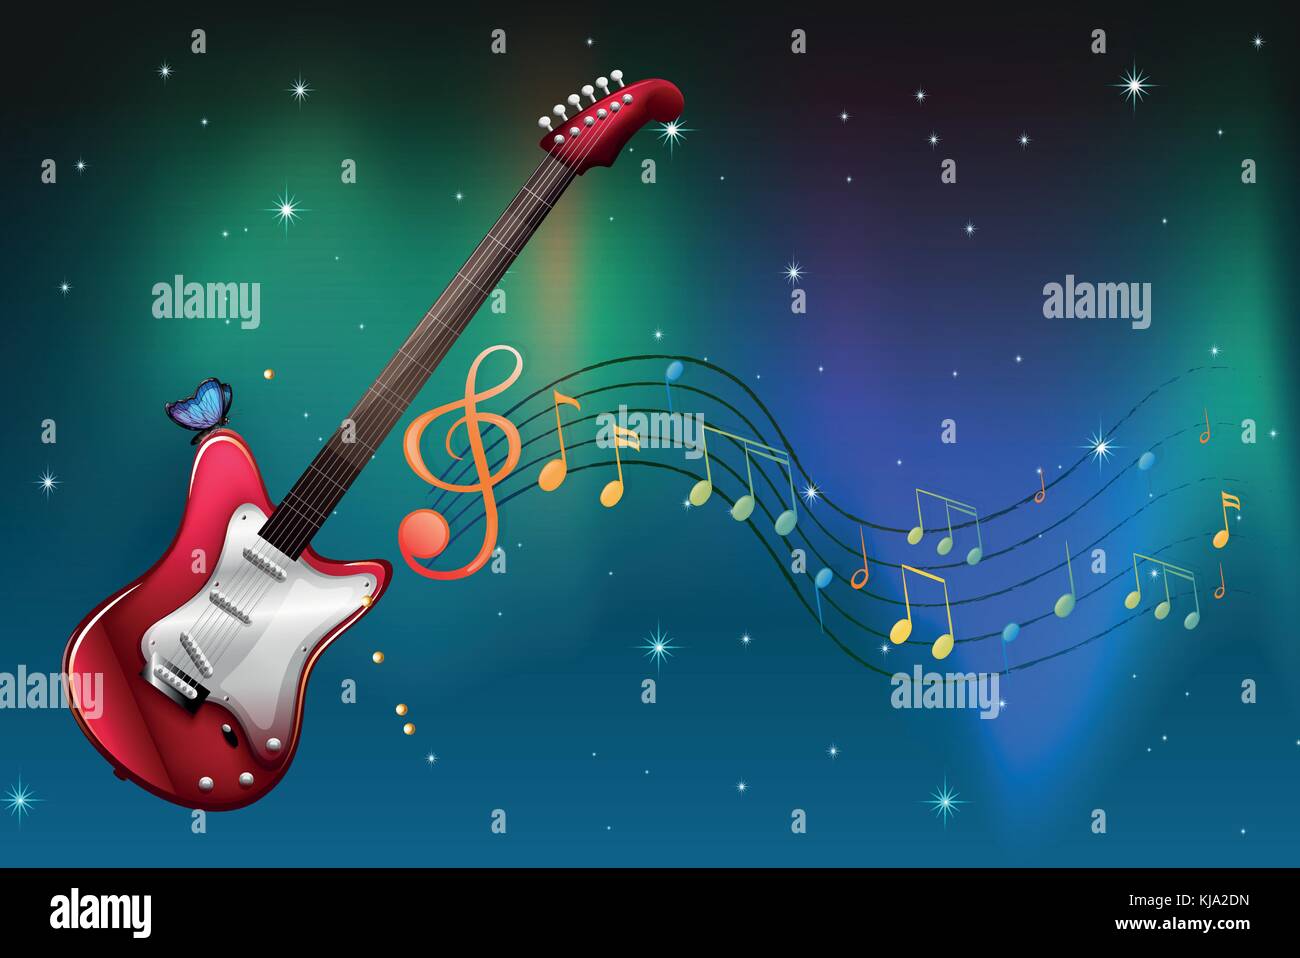 Illustration of a red guitar with musical notes Stock Vector